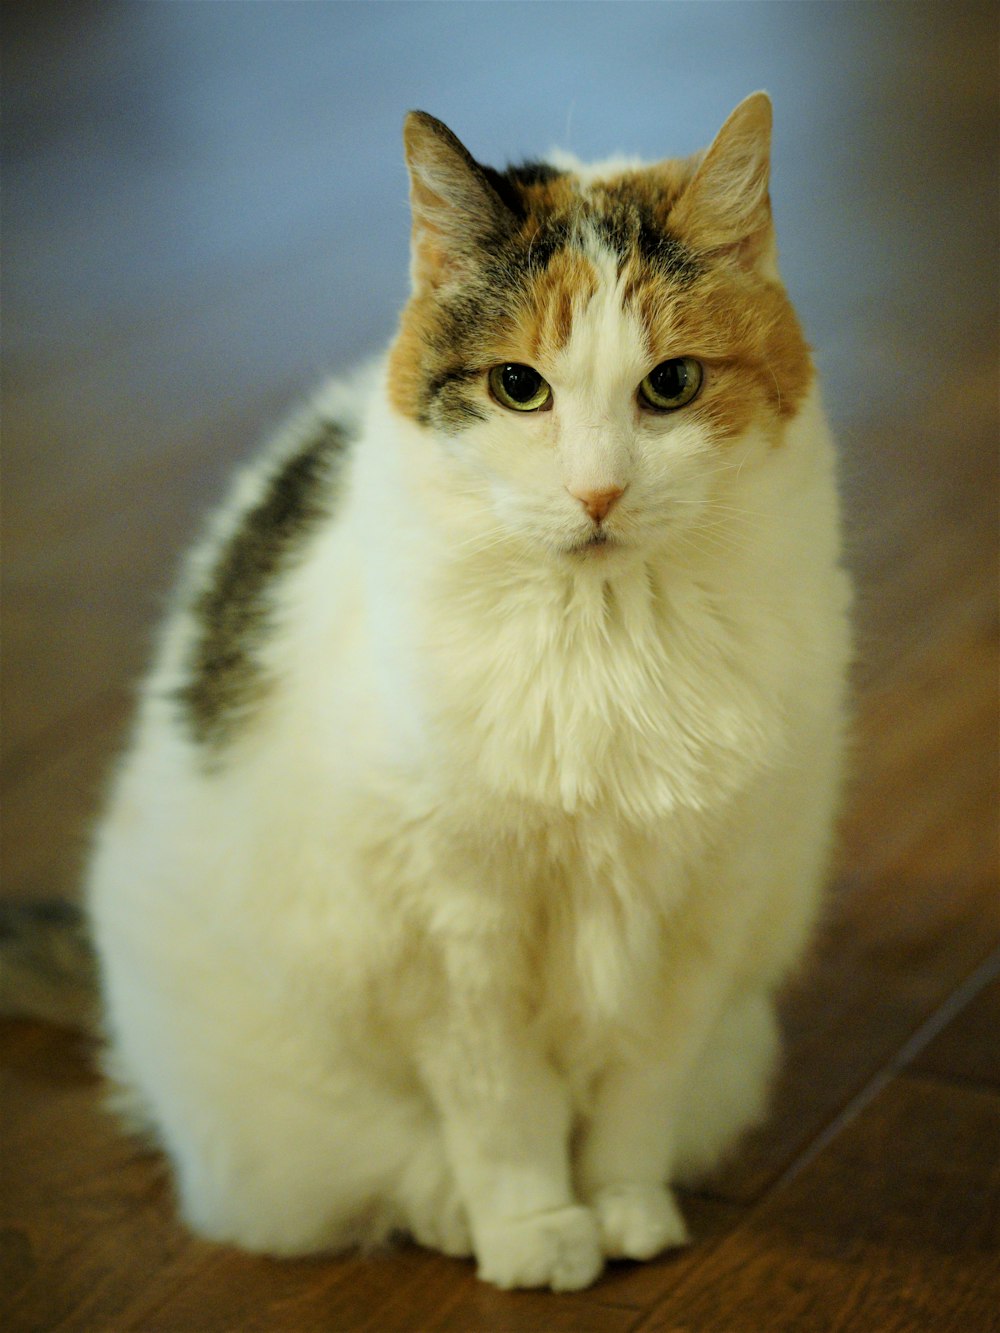 white, brown, and grey calico cat sitting on wooden floor